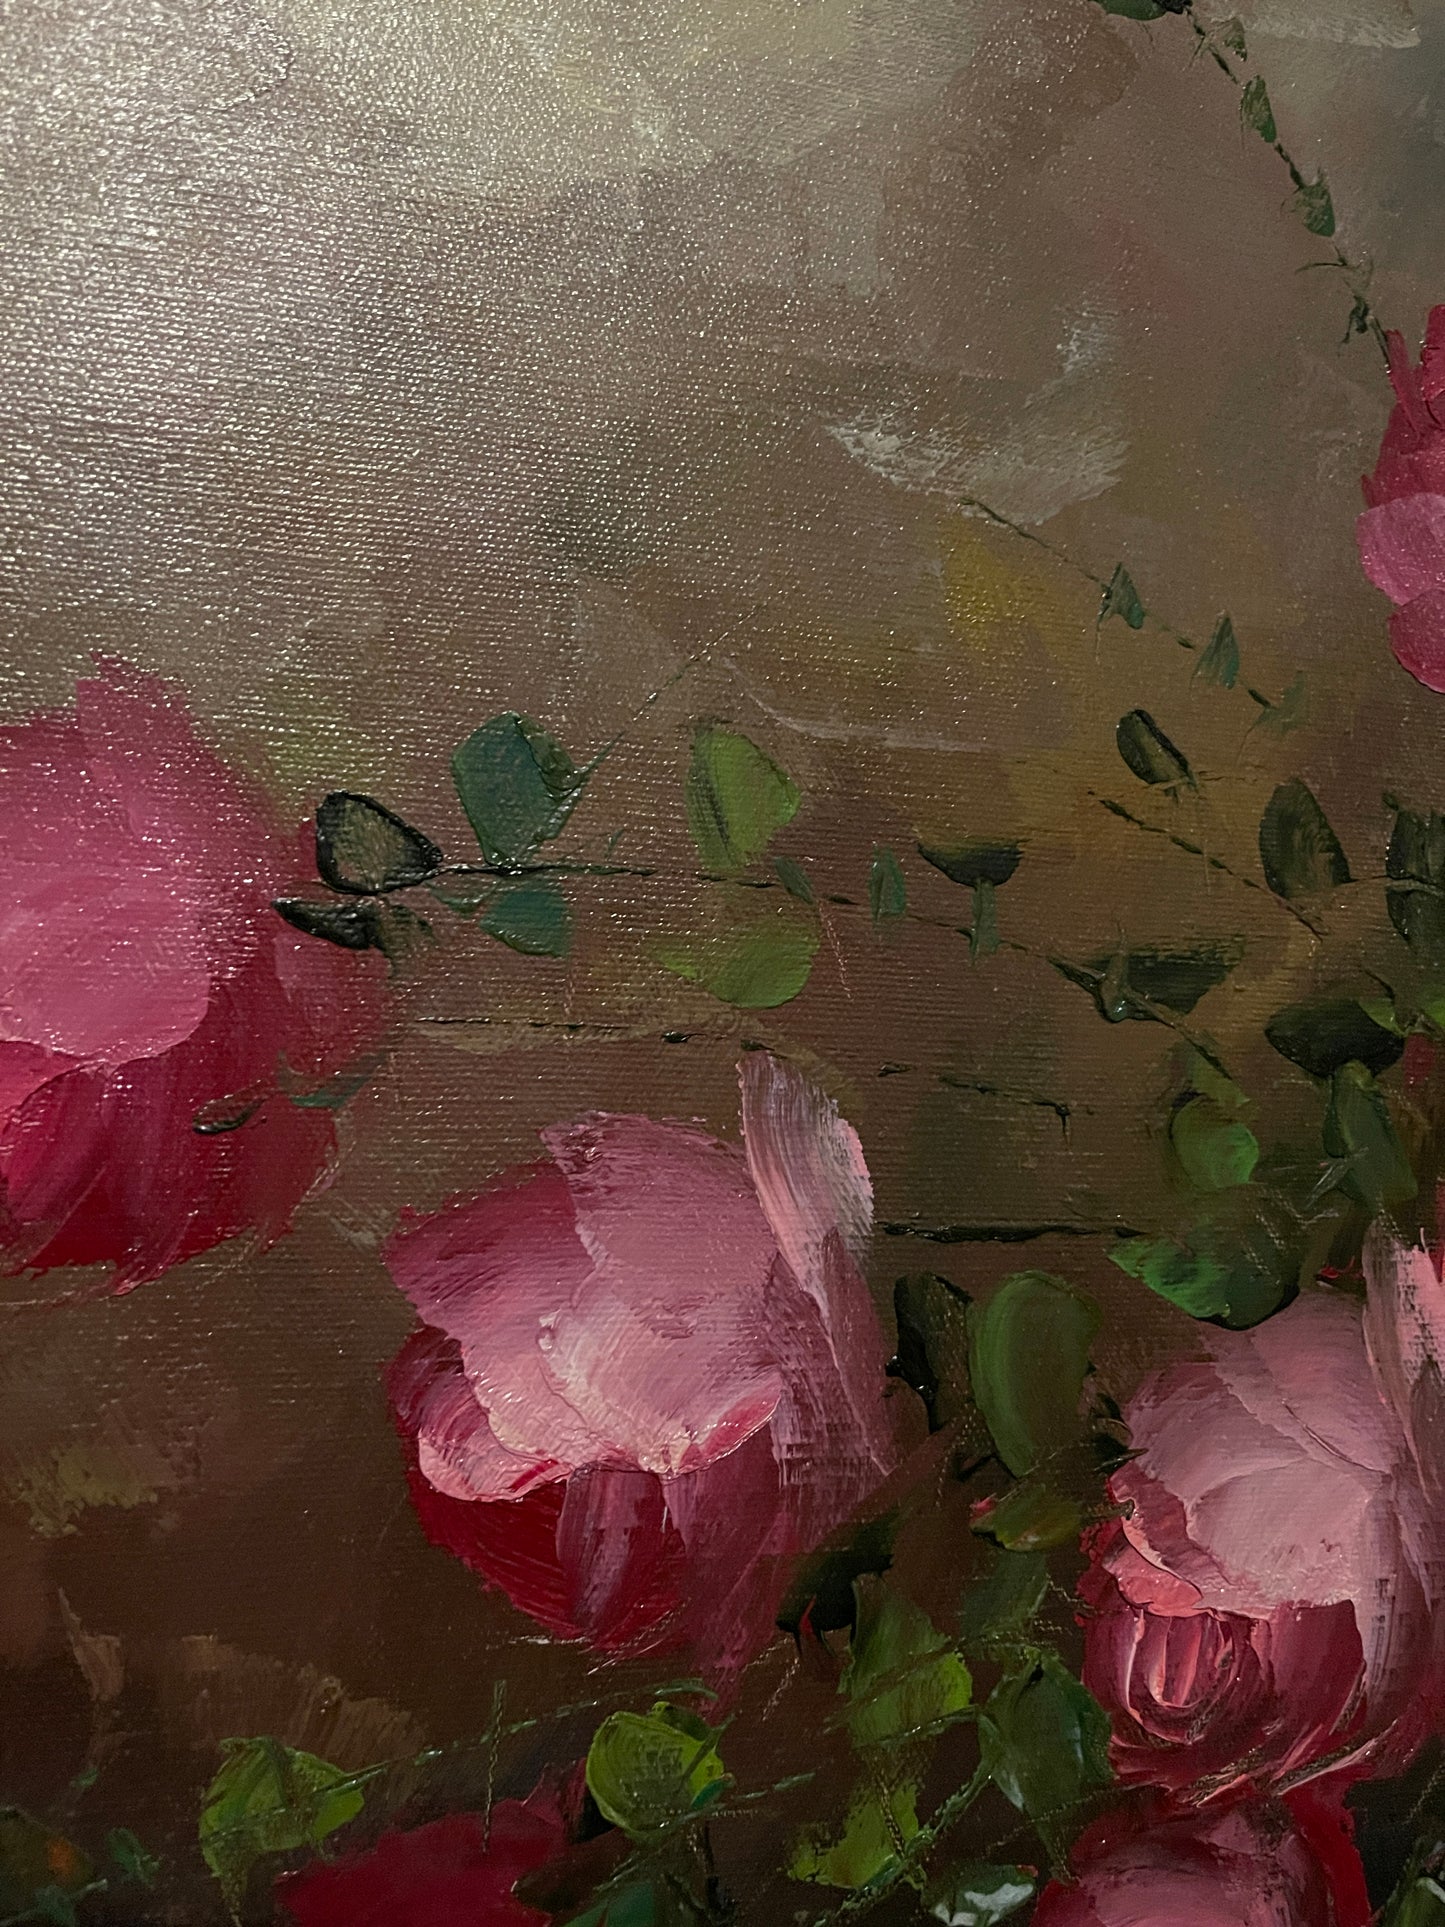 Pink Flowers in Green Vase by Robert Cox (1934-2001) Original Oil Painting, Estate Decor, Large Vintage Painting, Framed and Signed